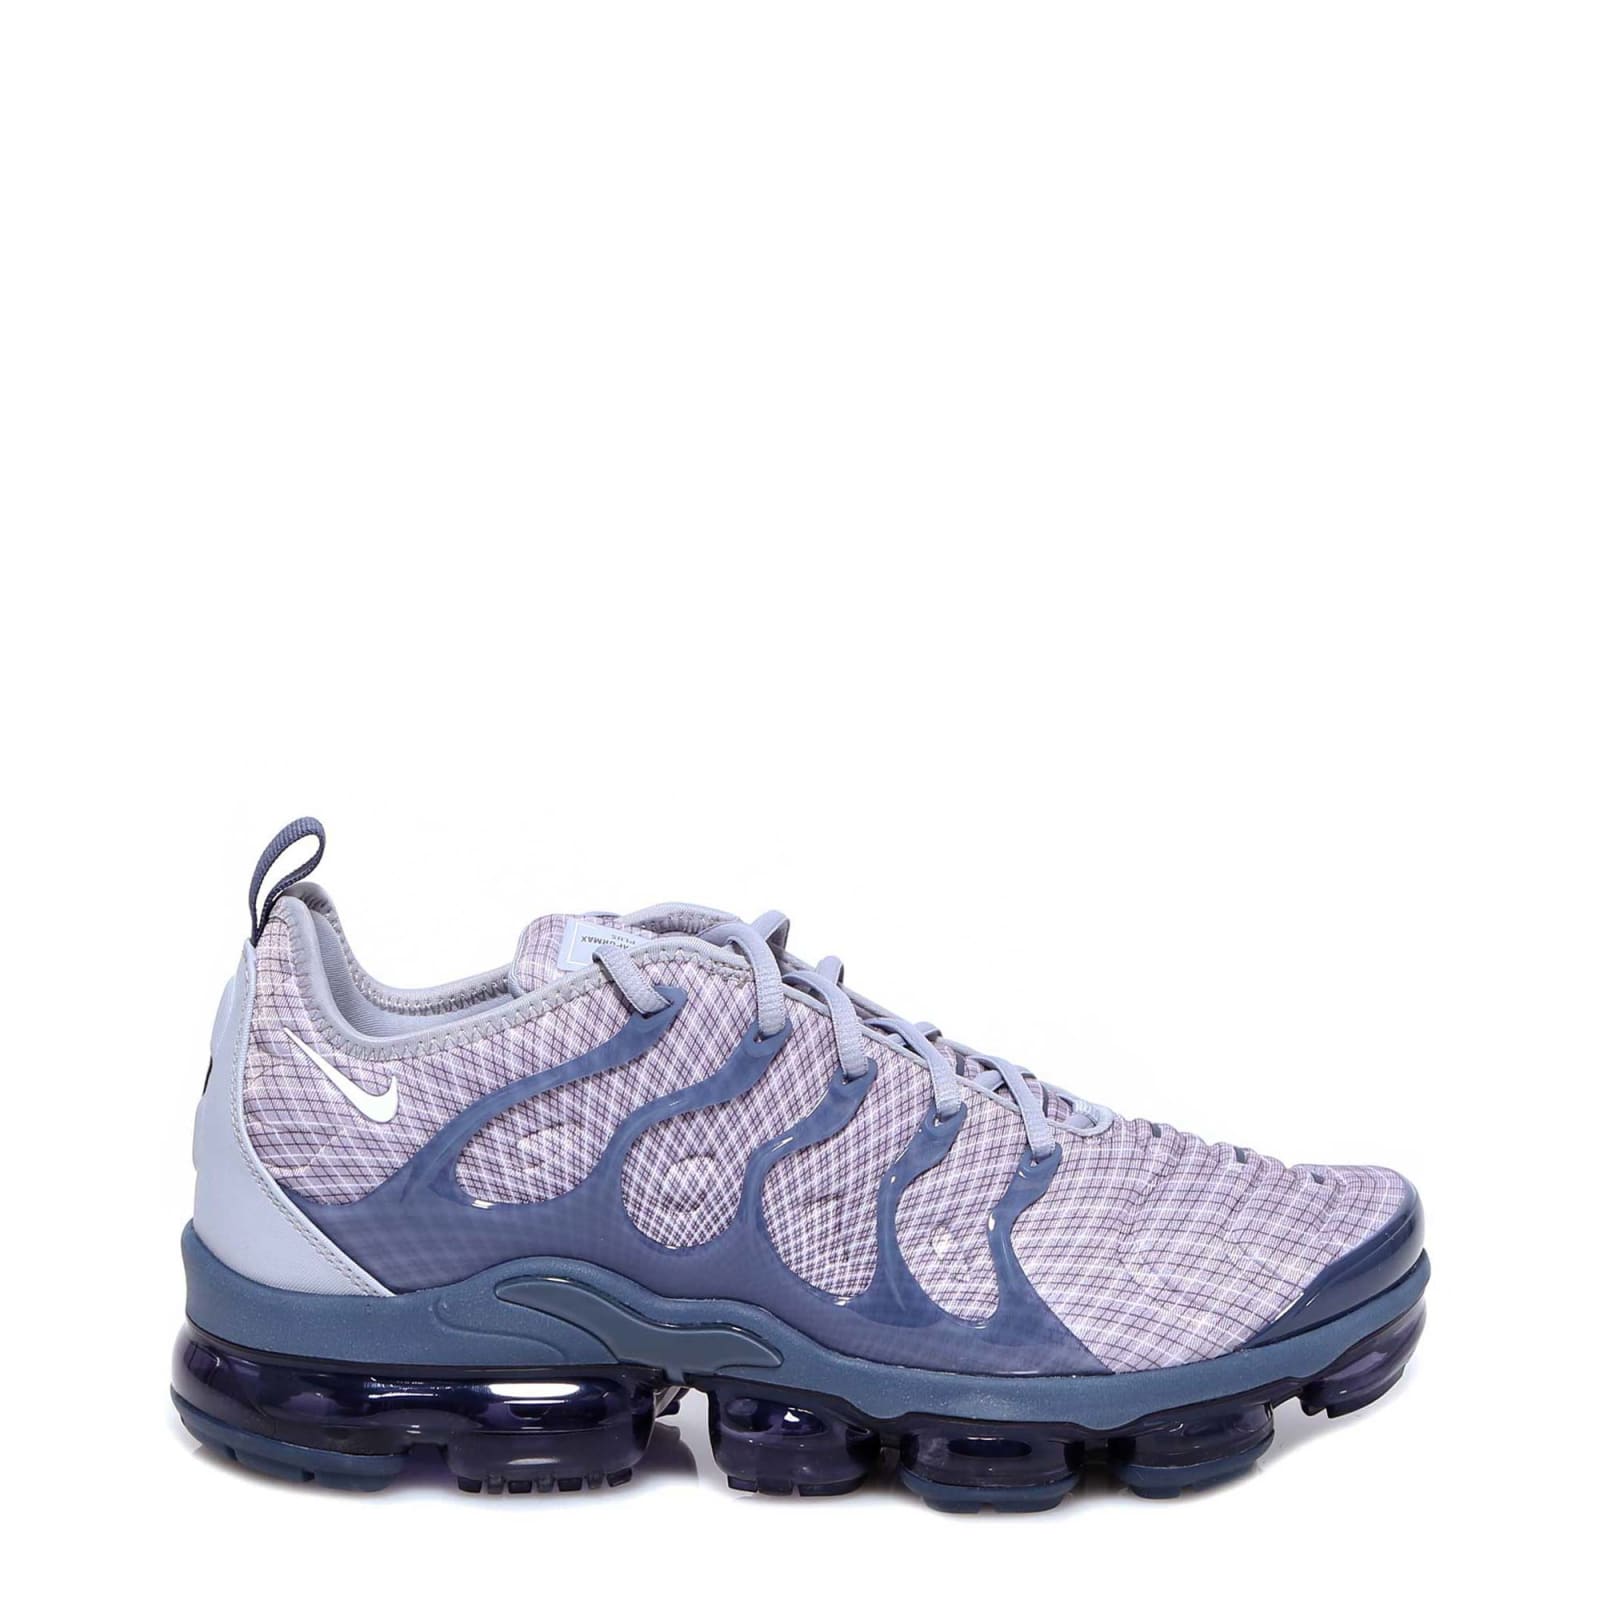 Air VaporMax Plus Chicago mens Shoe in 2020 All white